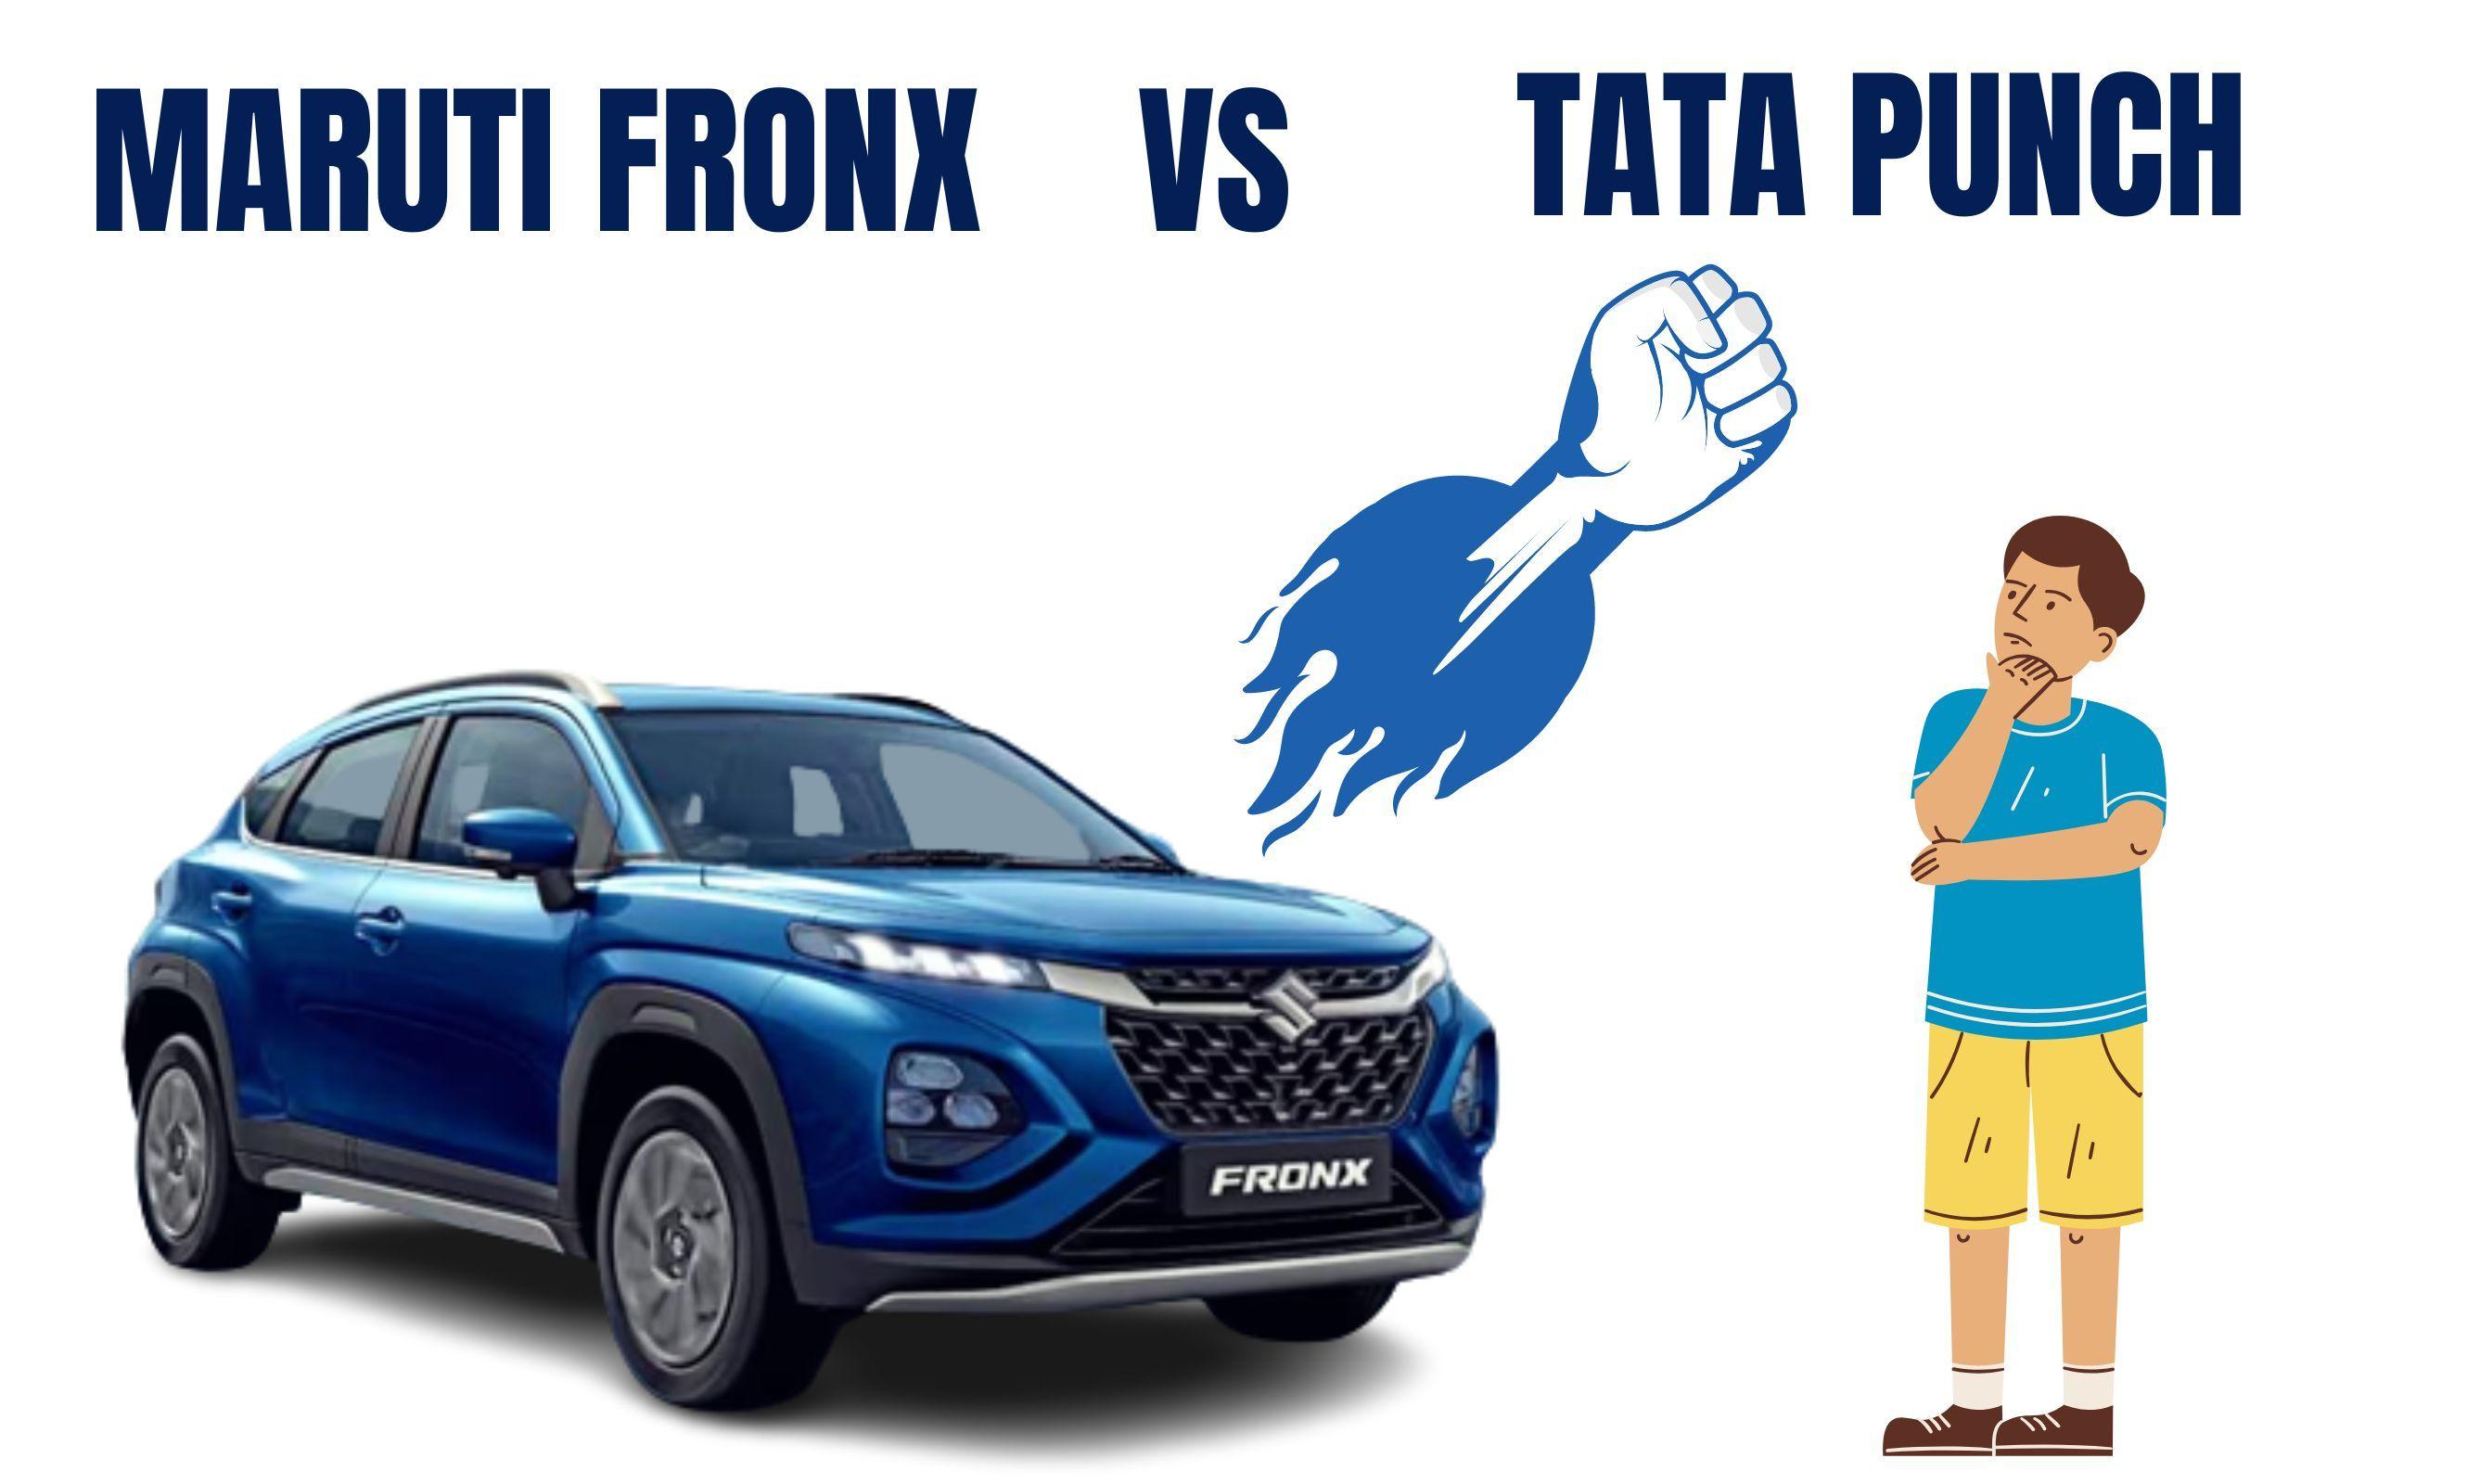 Can Maruti Fronx knock out Tata Punch from the market? 